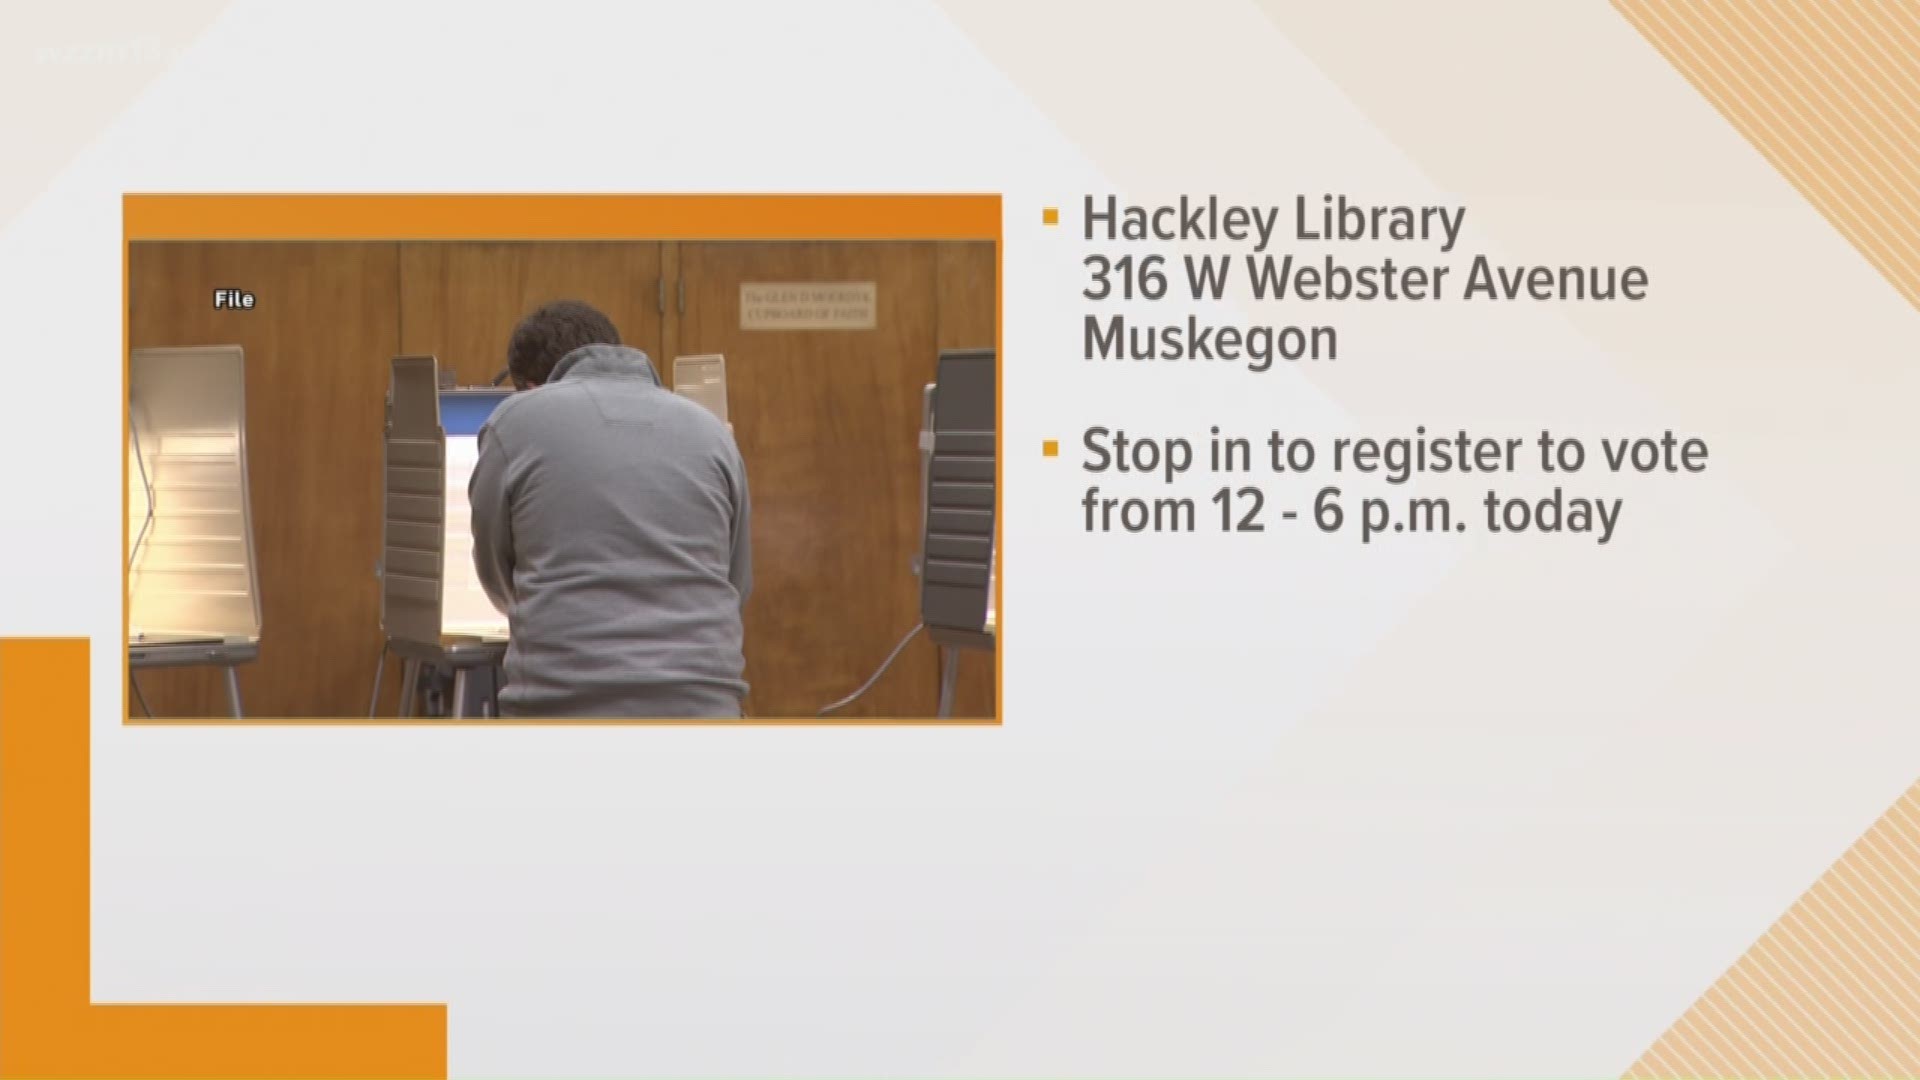 Register to vote at Hackley Library